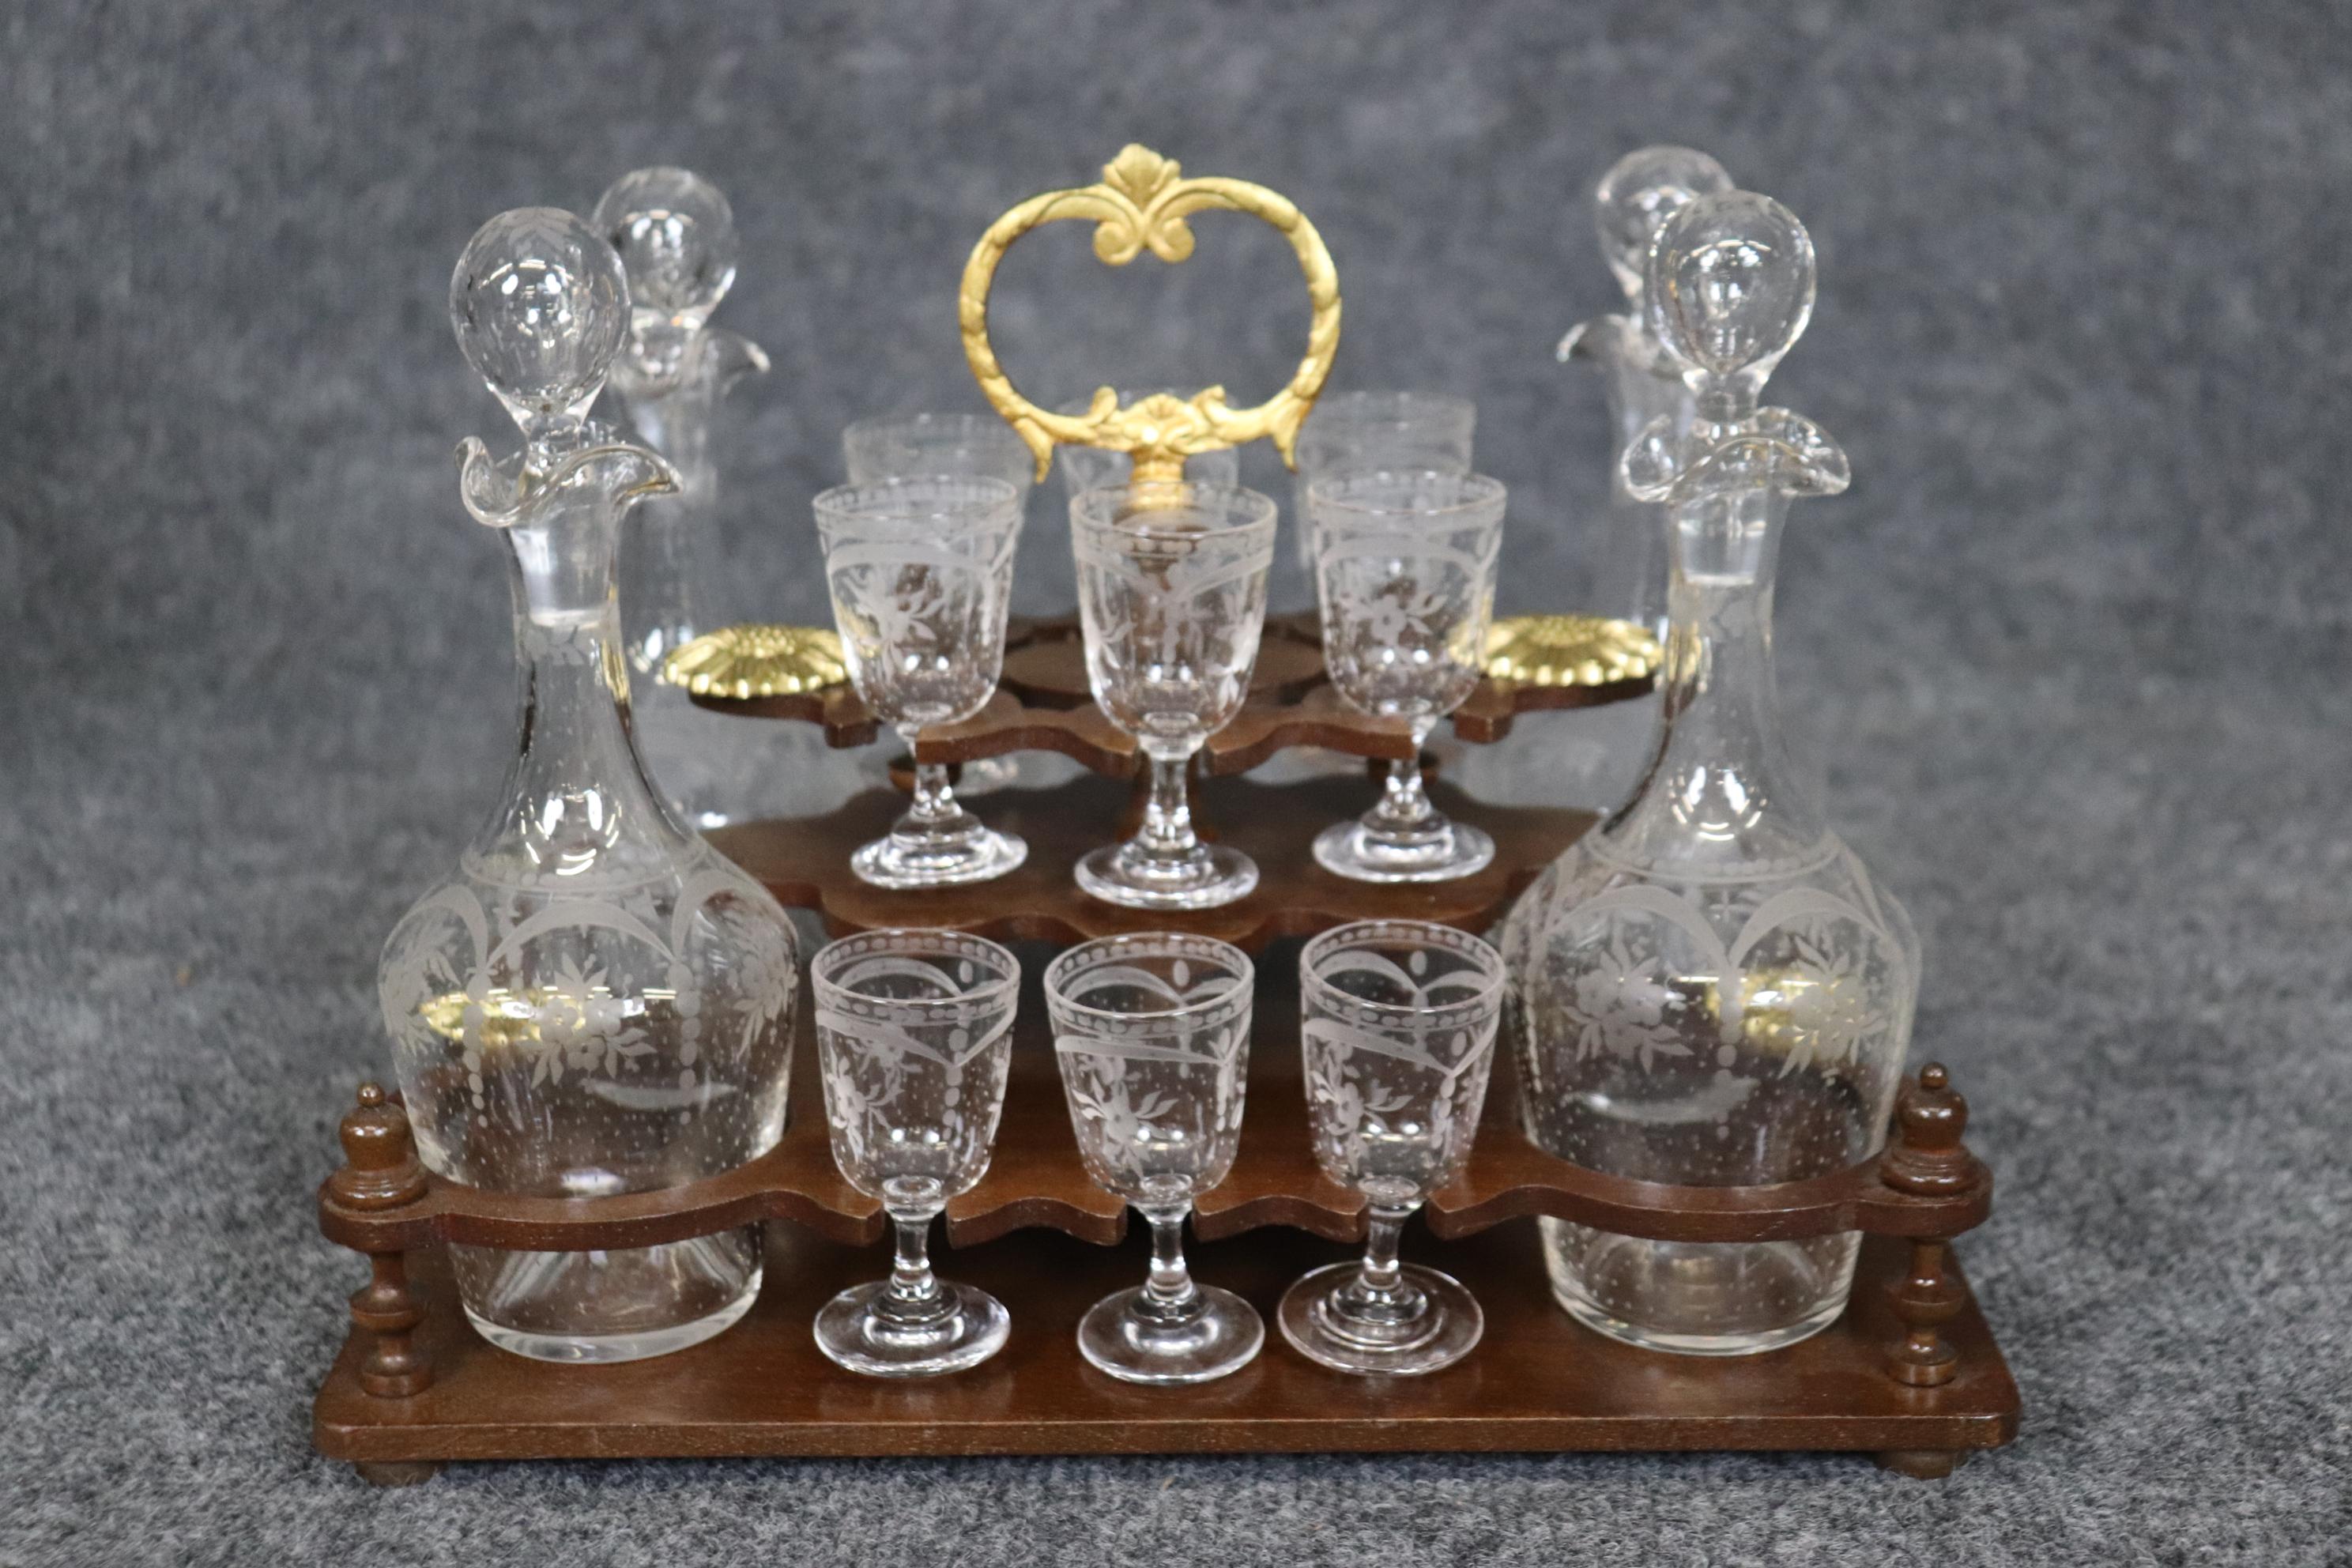 Rare Walnut Case French Etched Glass 18-piece decanter and Cordial Tantalus Set For Sale 1